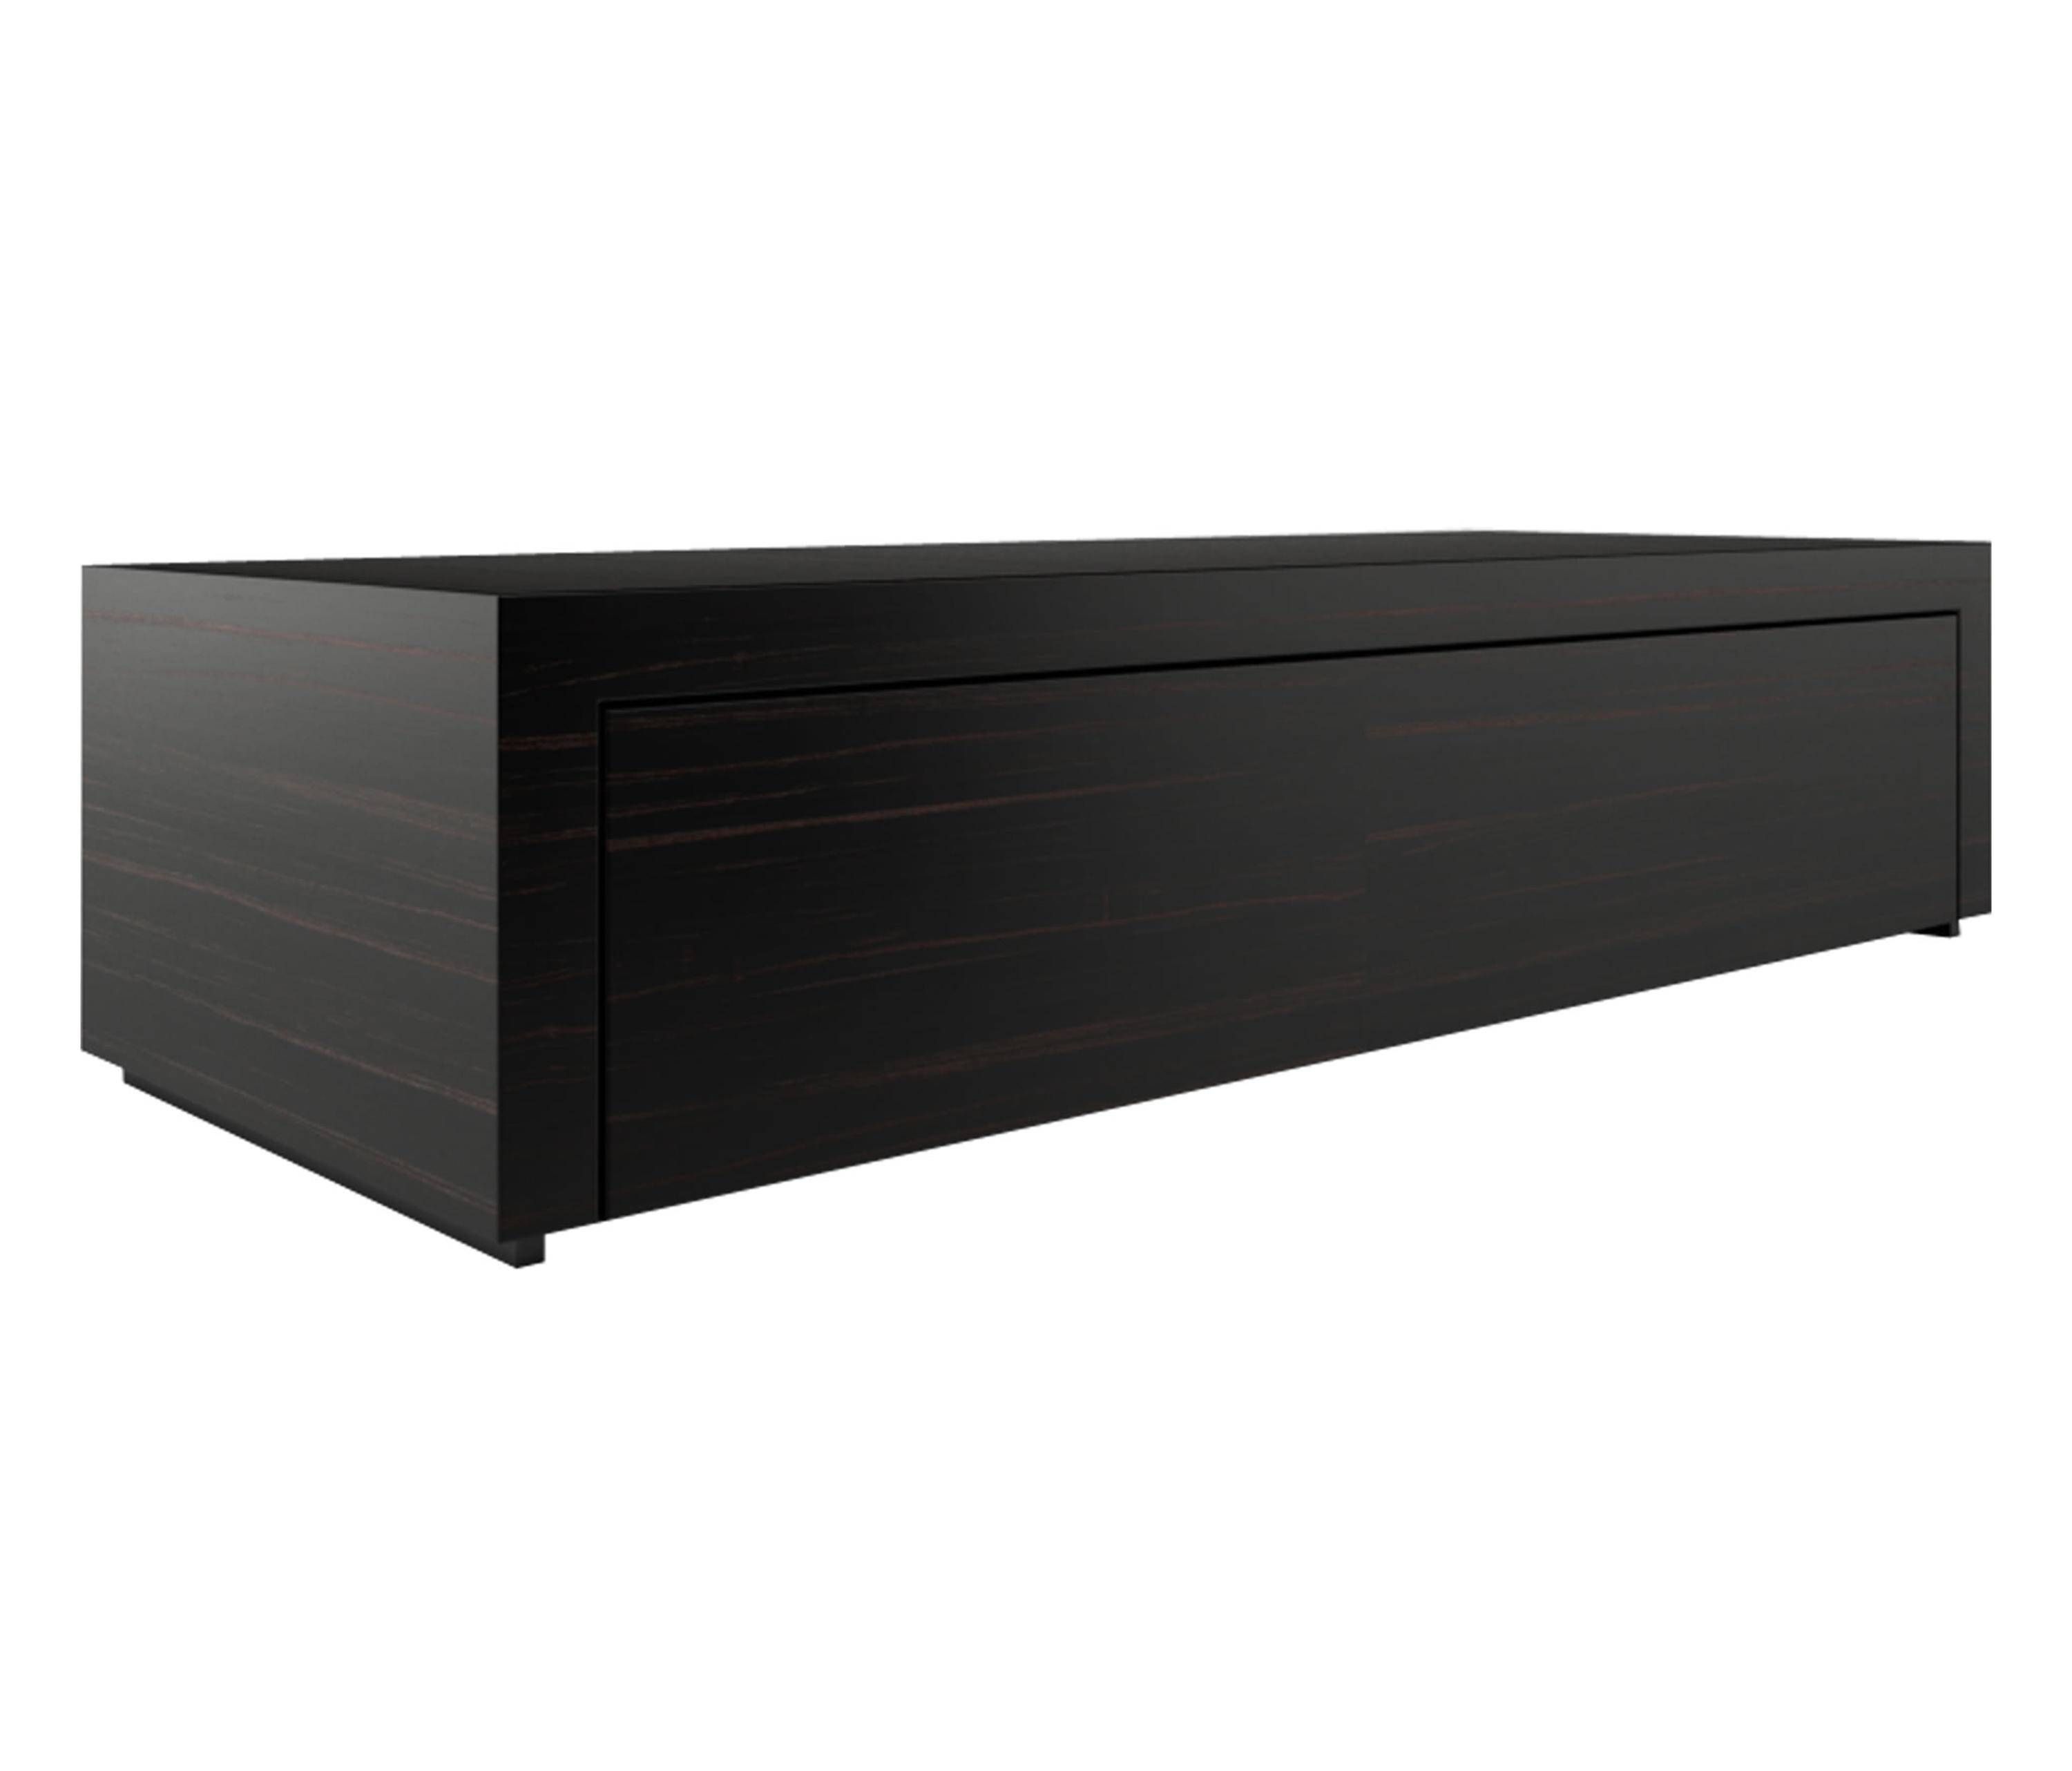 Repositio Tv/ Hifi Sideboard – Sideboards From Rechteck | Architonic In Tv Sideboards (View 11 of 20)